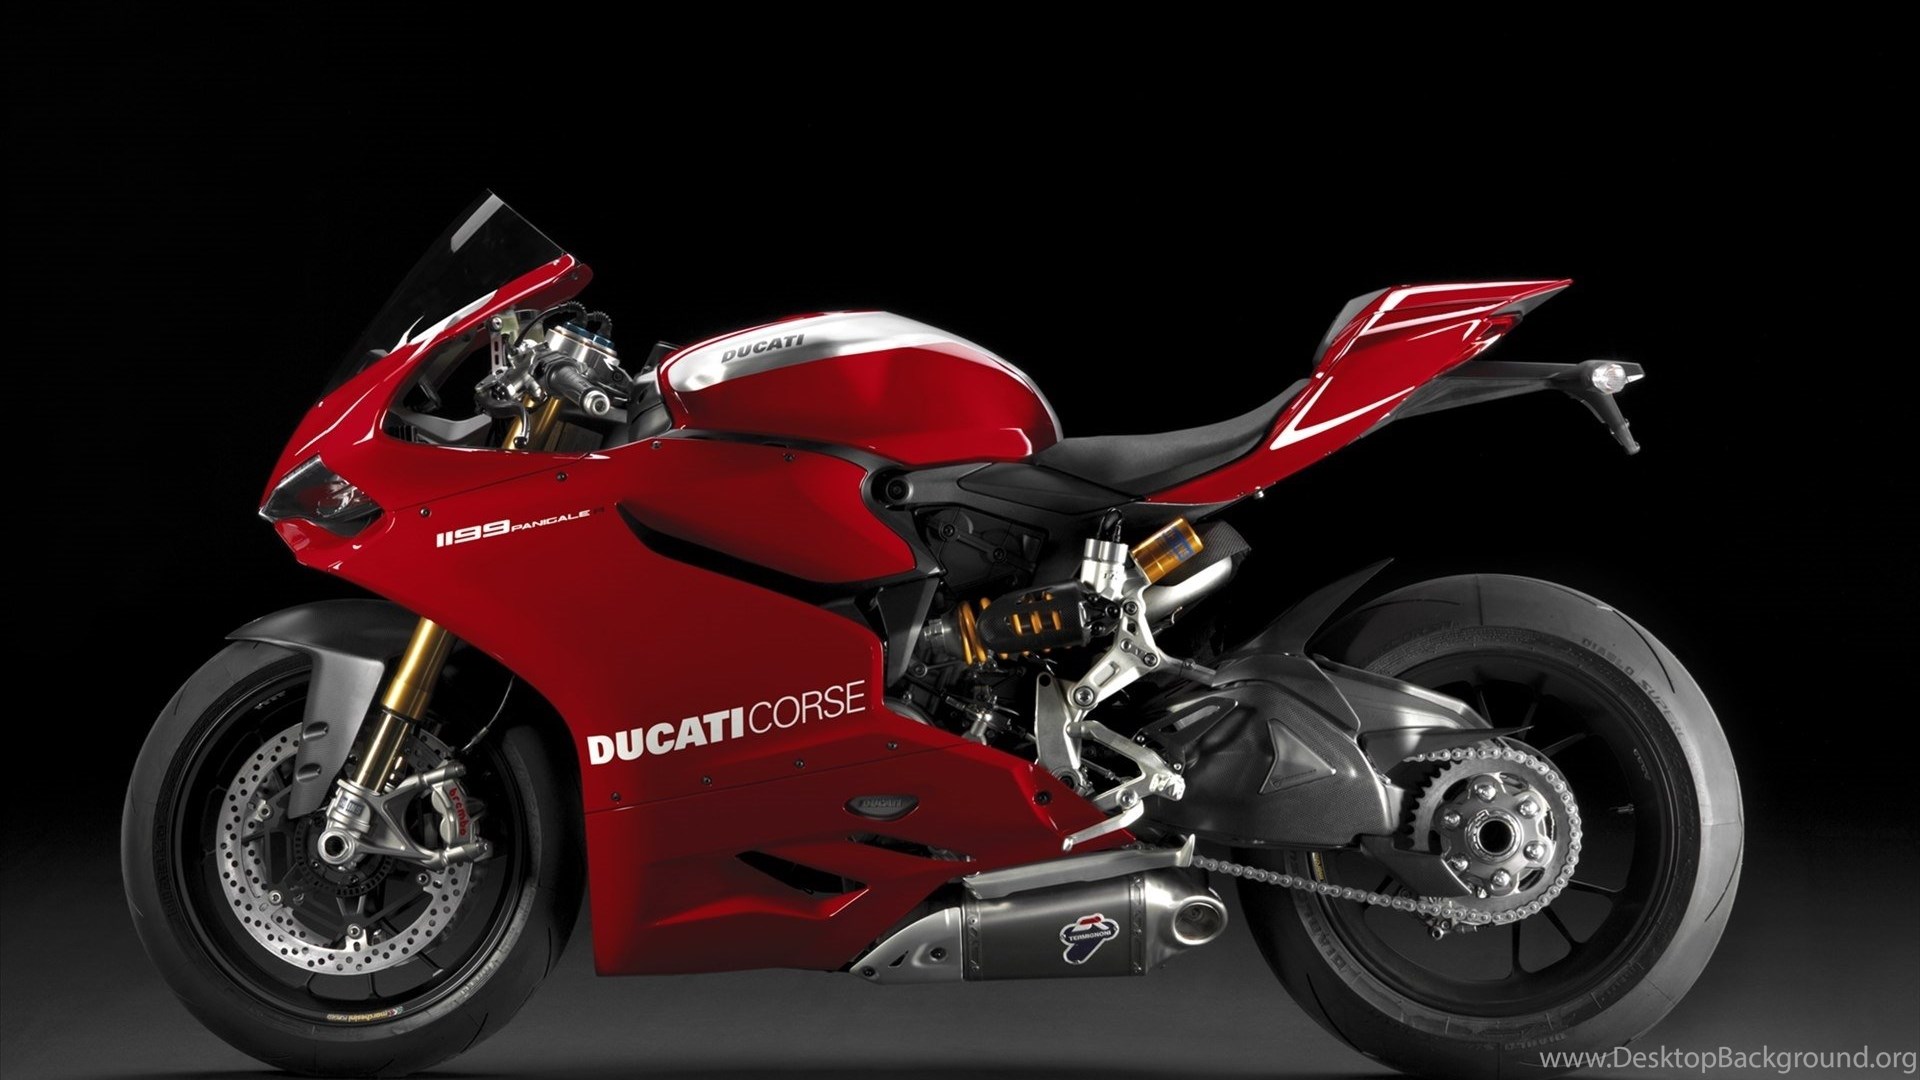 Ducati Superbike Wallpapers For Android - Ducati Panigale 1199 R Superleggera 2015 , HD Wallpaper & Backgrounds